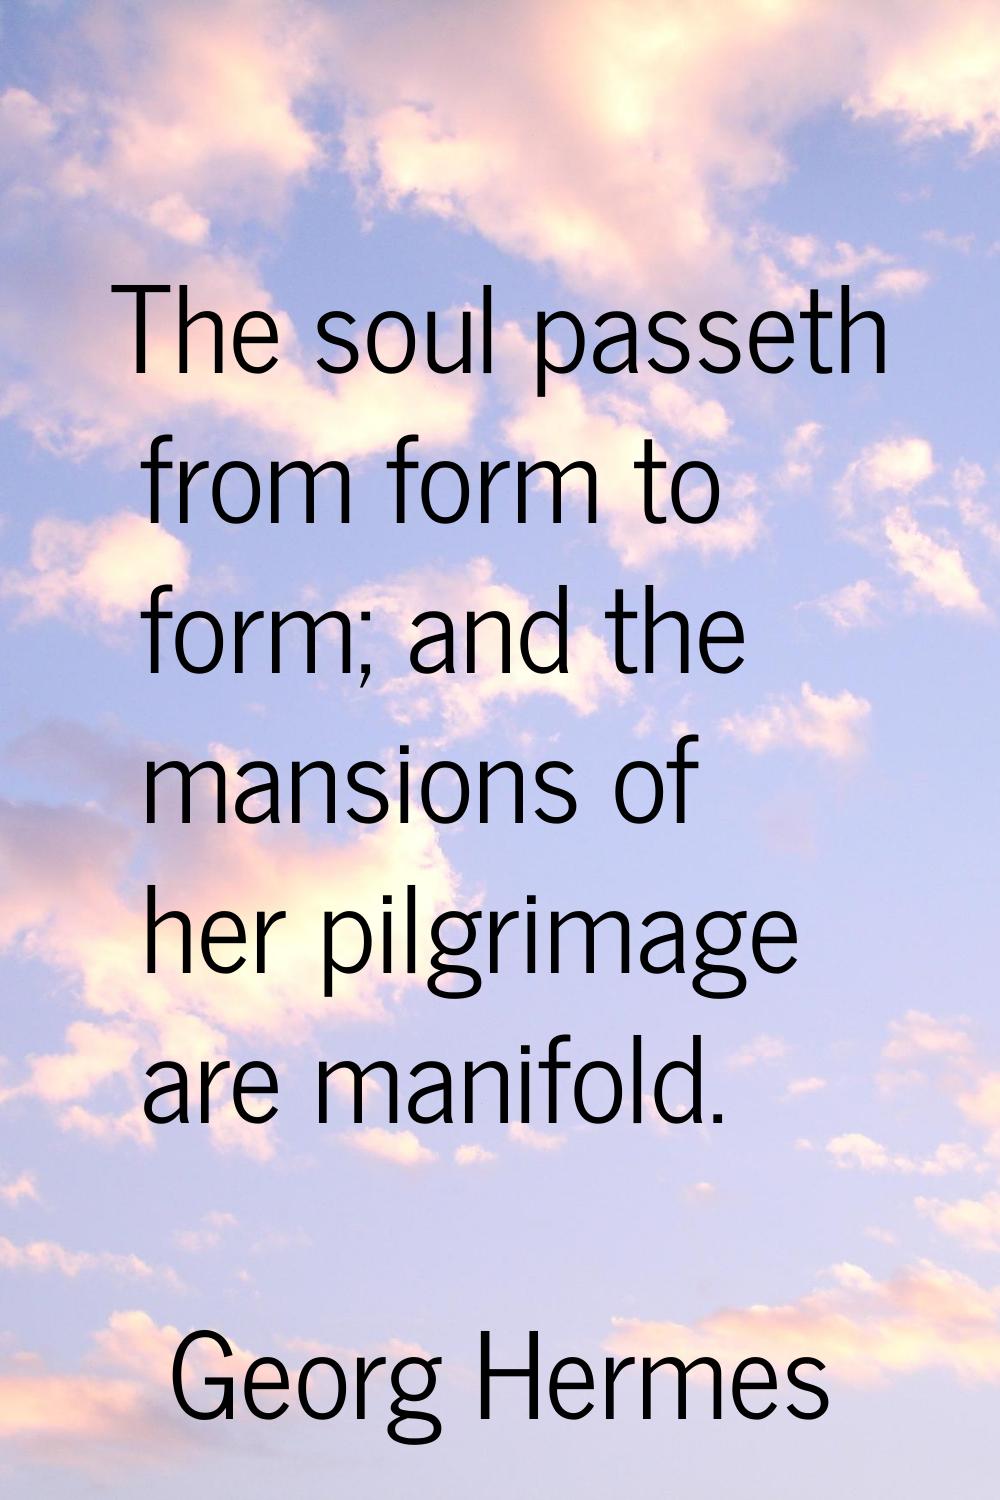 The soul passeth from form to form; and the mansions of her pilgrimage are manifold.